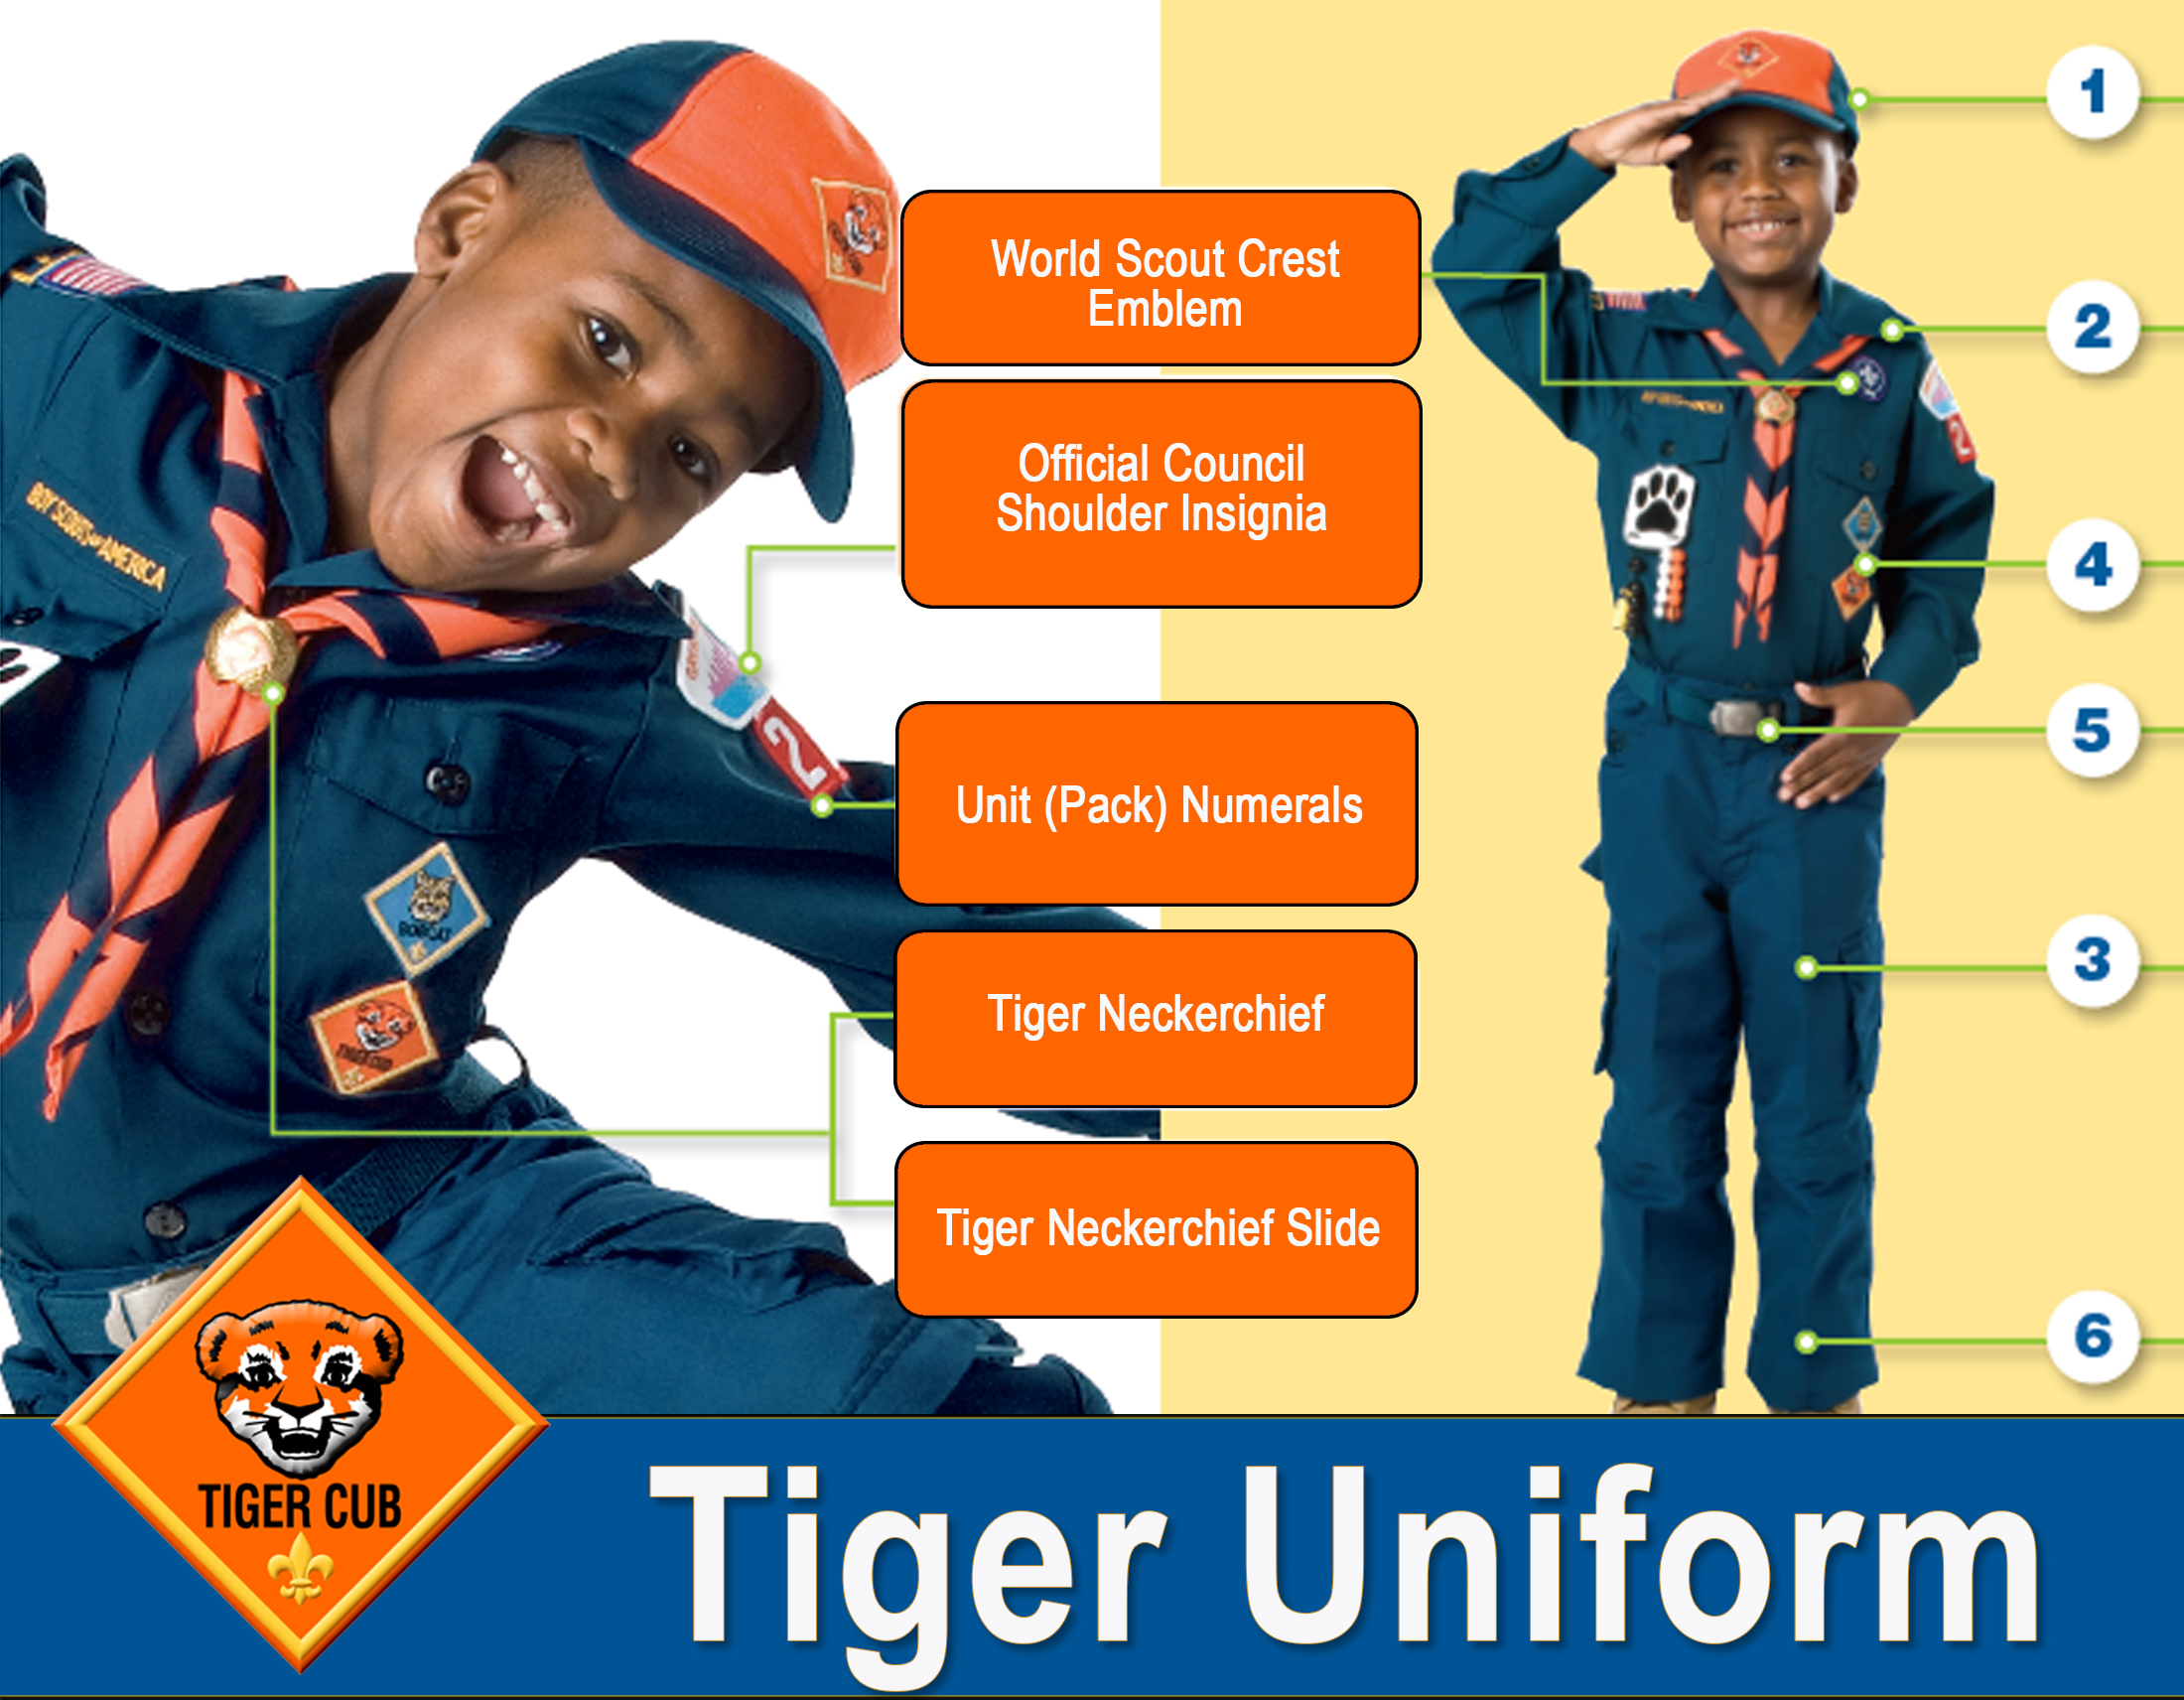 Where To Buy Scout Uniform 4